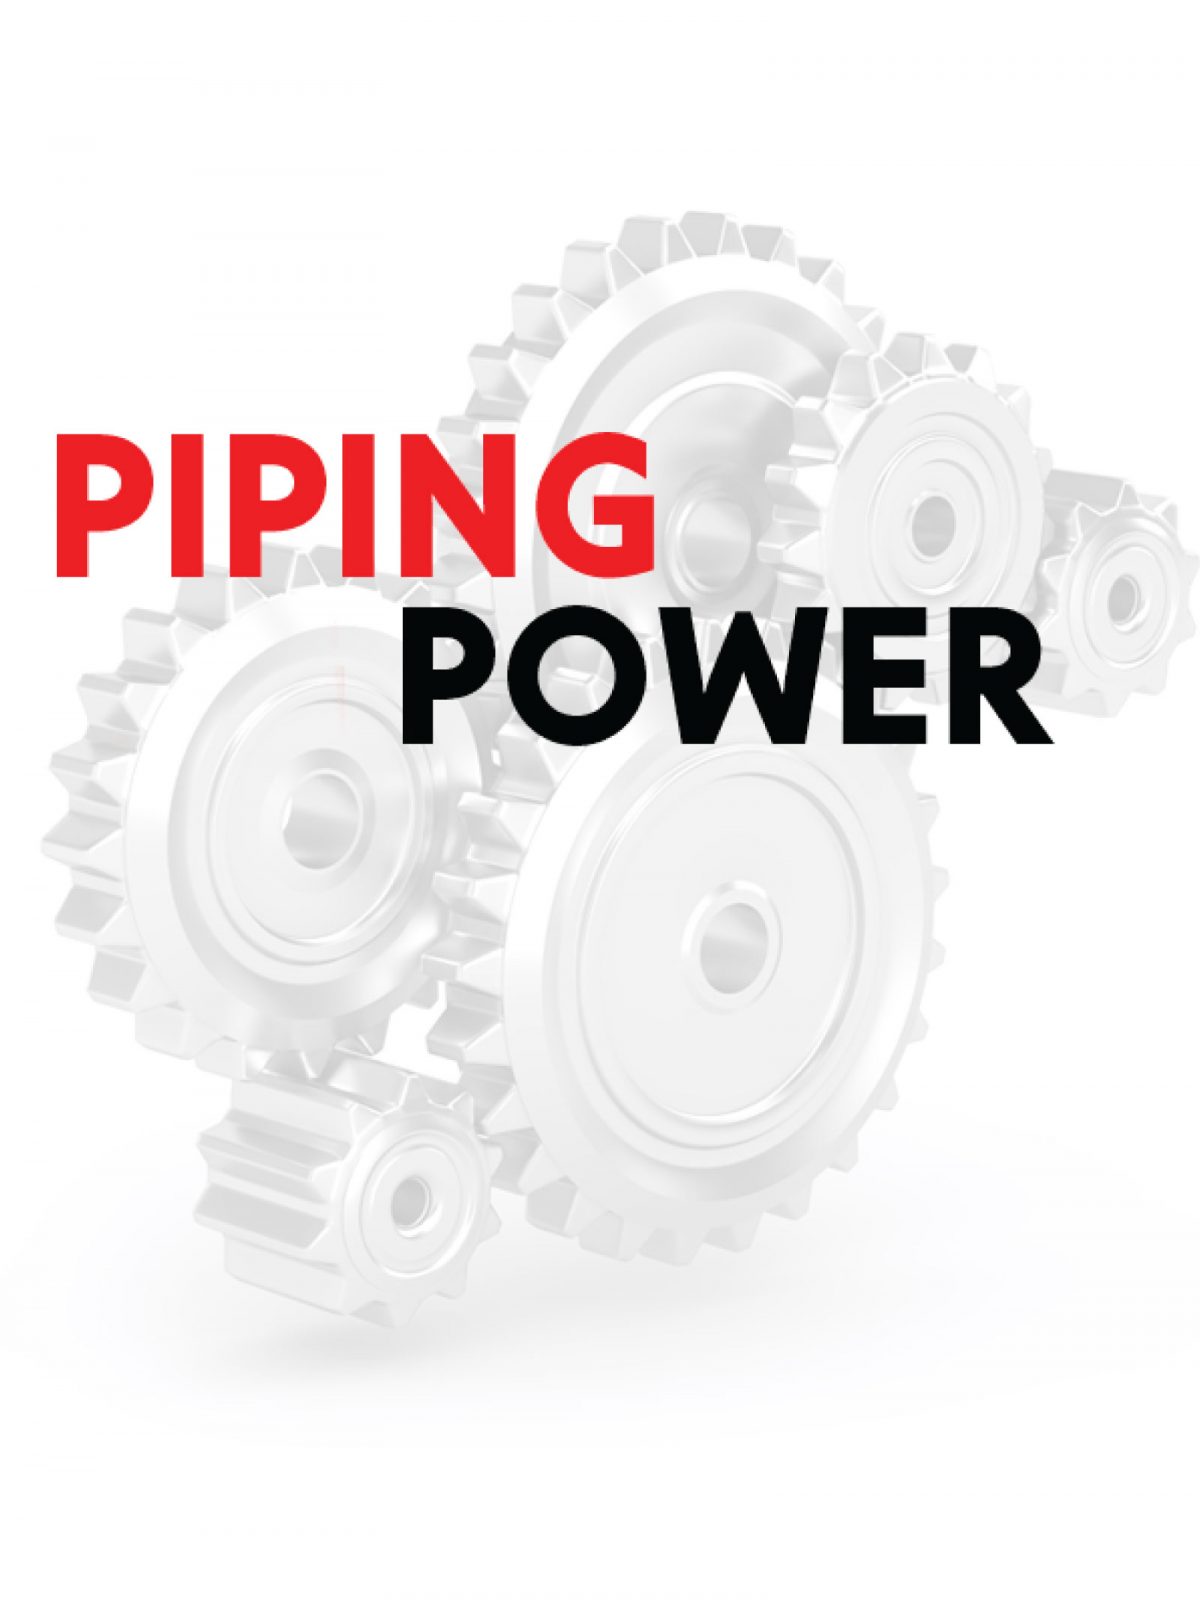 PIPPING-POWER